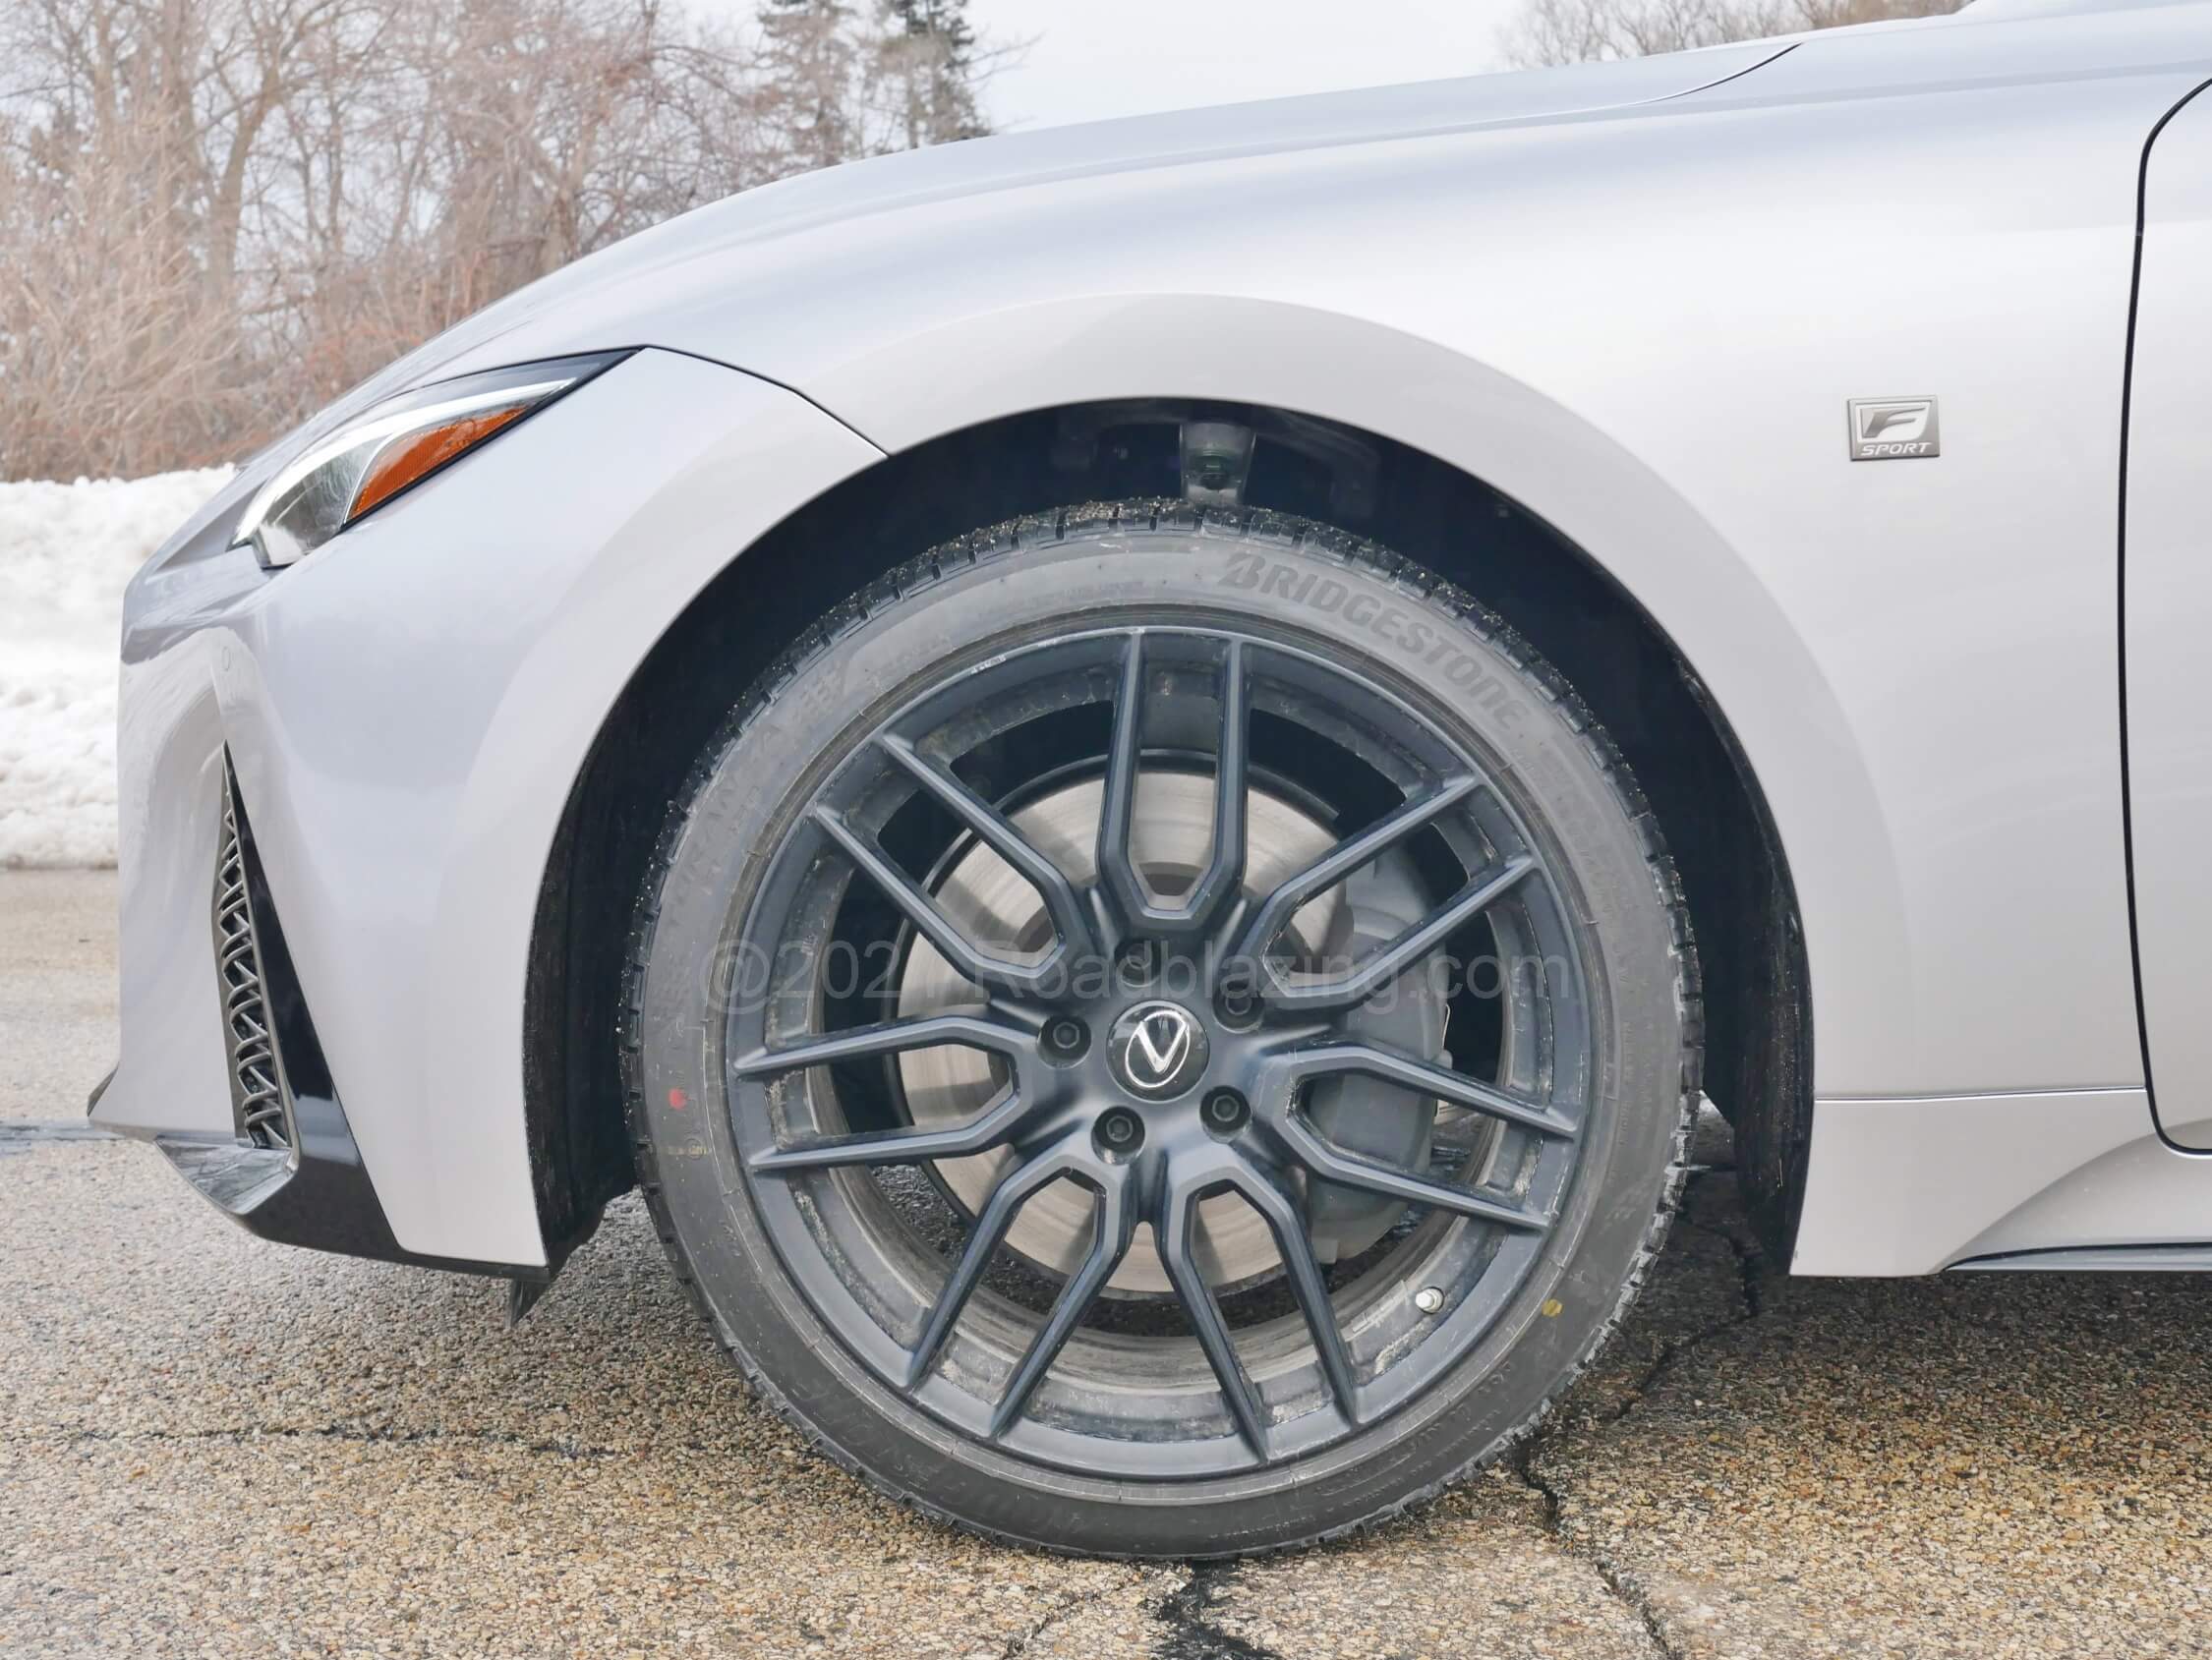 2021 Lexus IS 350 AWD: $3800 Dynamic Pkg swaps in 19" BBS matte black alloys + electronic variable damping, while AWD models make do with all-season rubber.